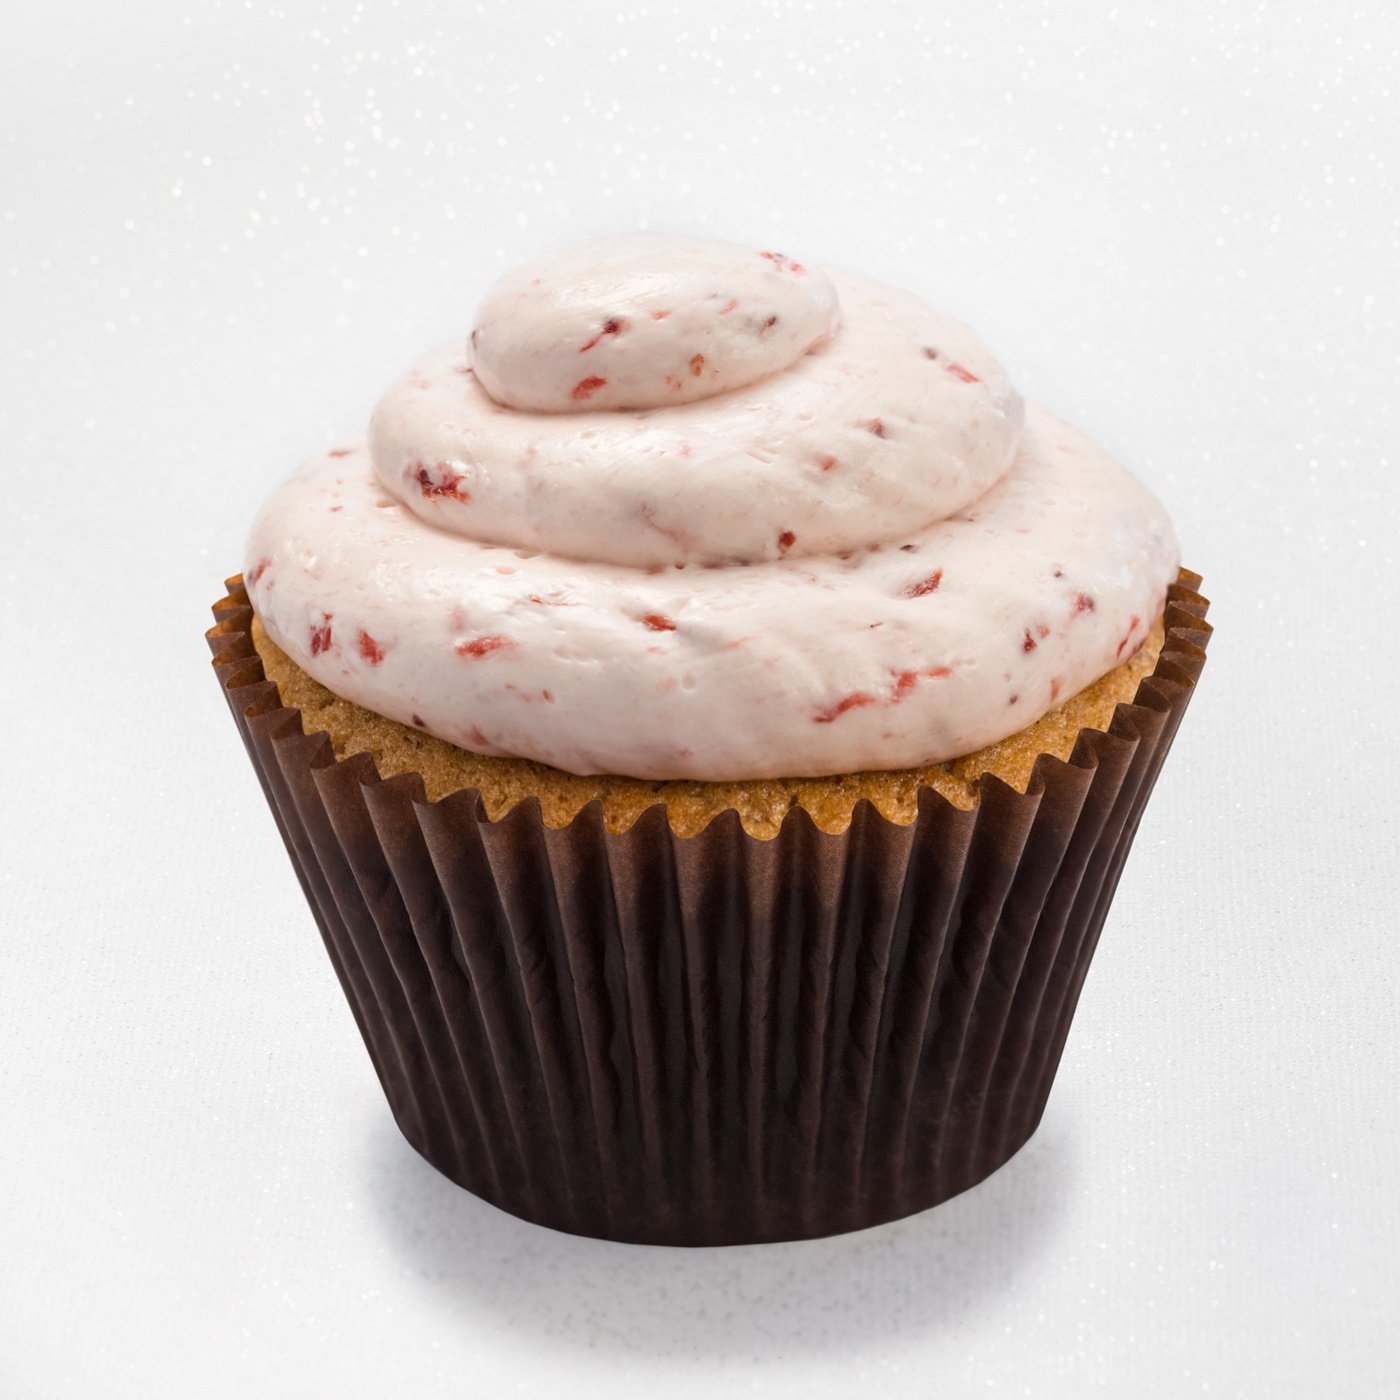 Strawberry cupcake with strawberry mousse